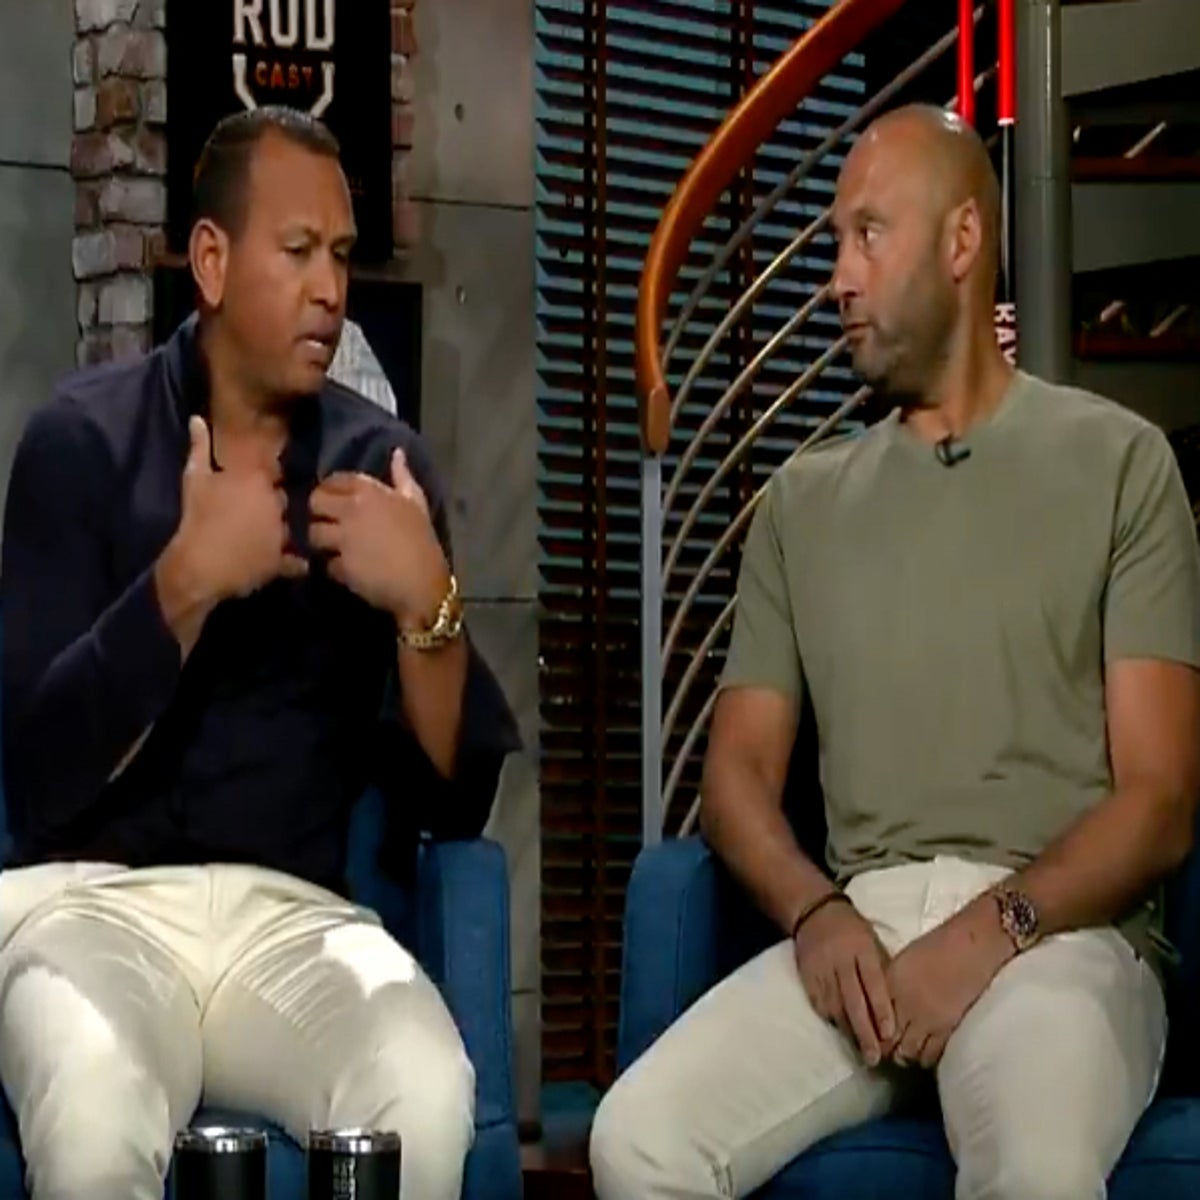 Derek Jeter Admits 2001 Interview Led to Fall Out with Alex Rodriguez